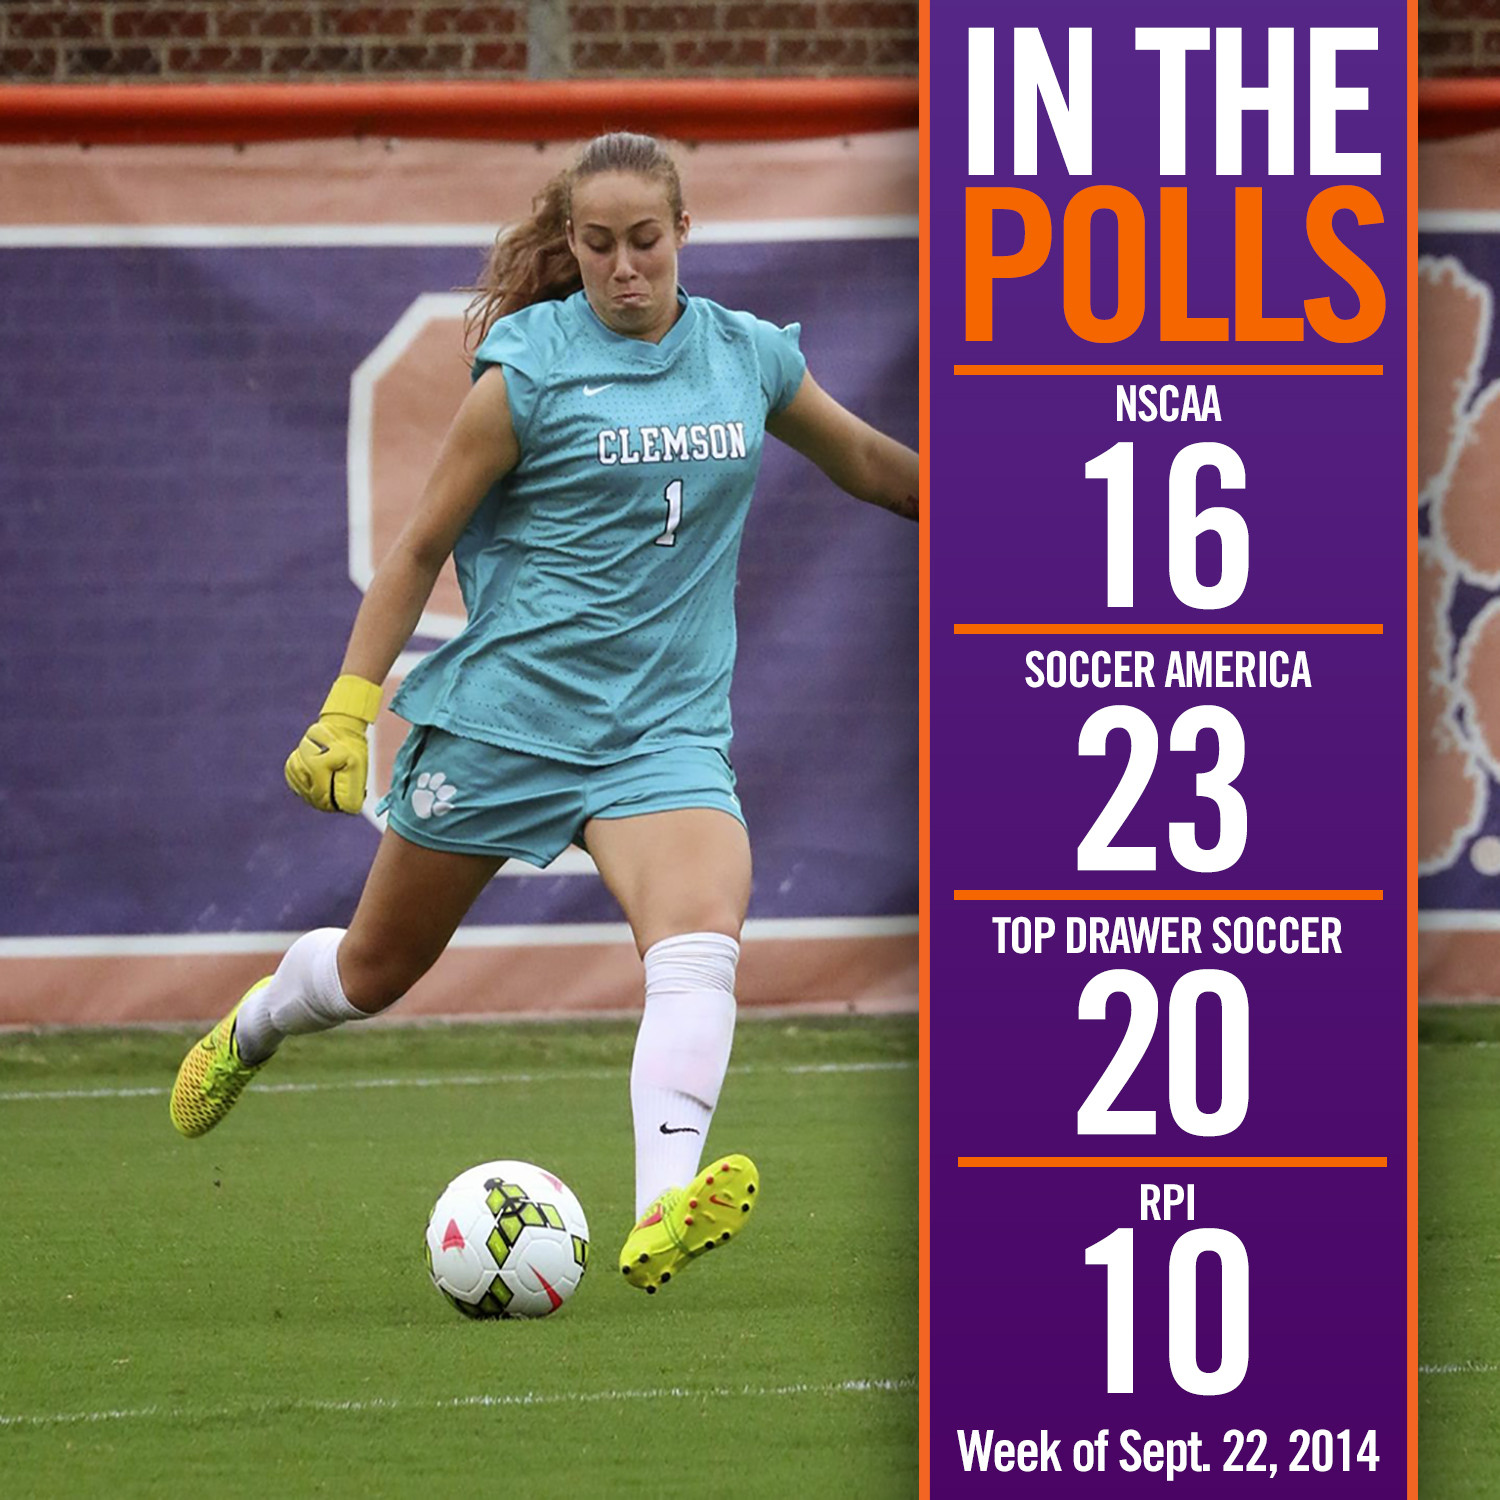 Tigers Up to #16 in NSCAA Poll, #10 in First RPI